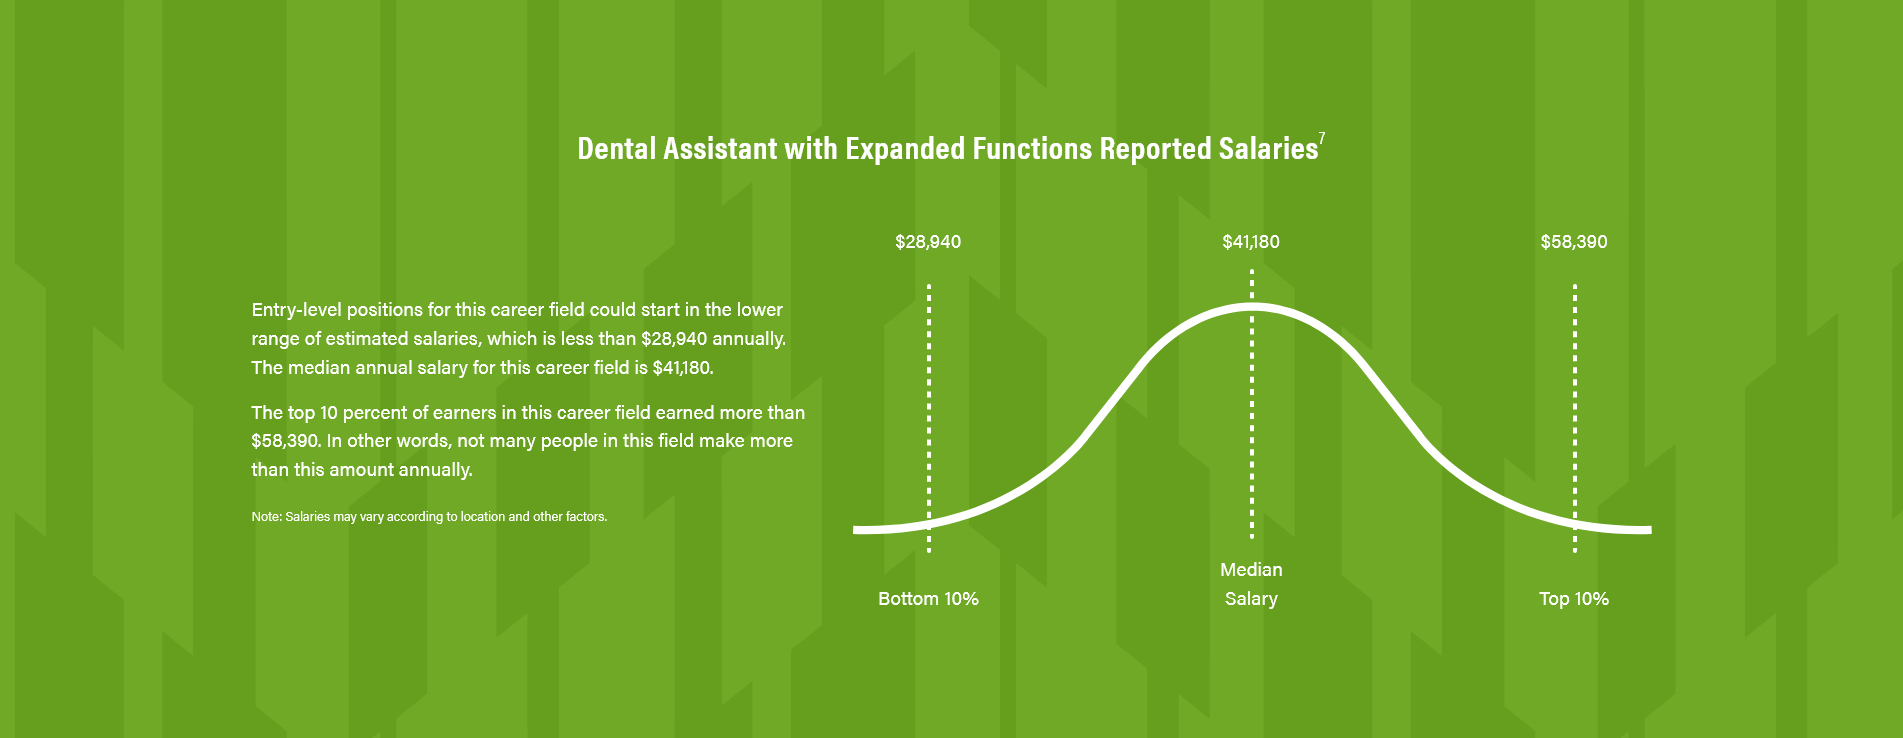 Dental Assistant Reported Salaries Chart